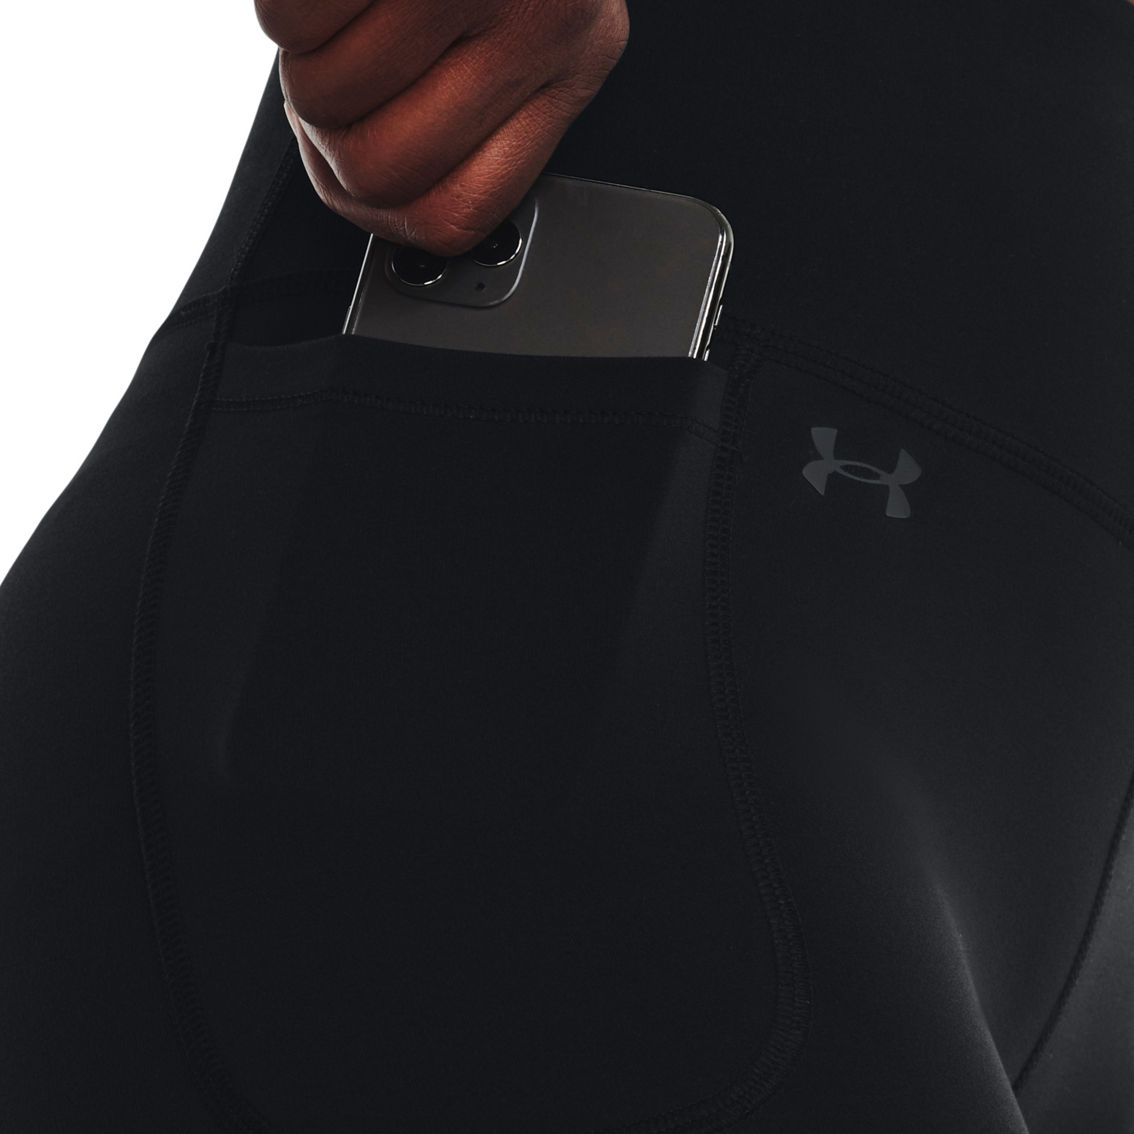 Under Armour 8 in. Motion Bike Shorts - Image 3 of 6